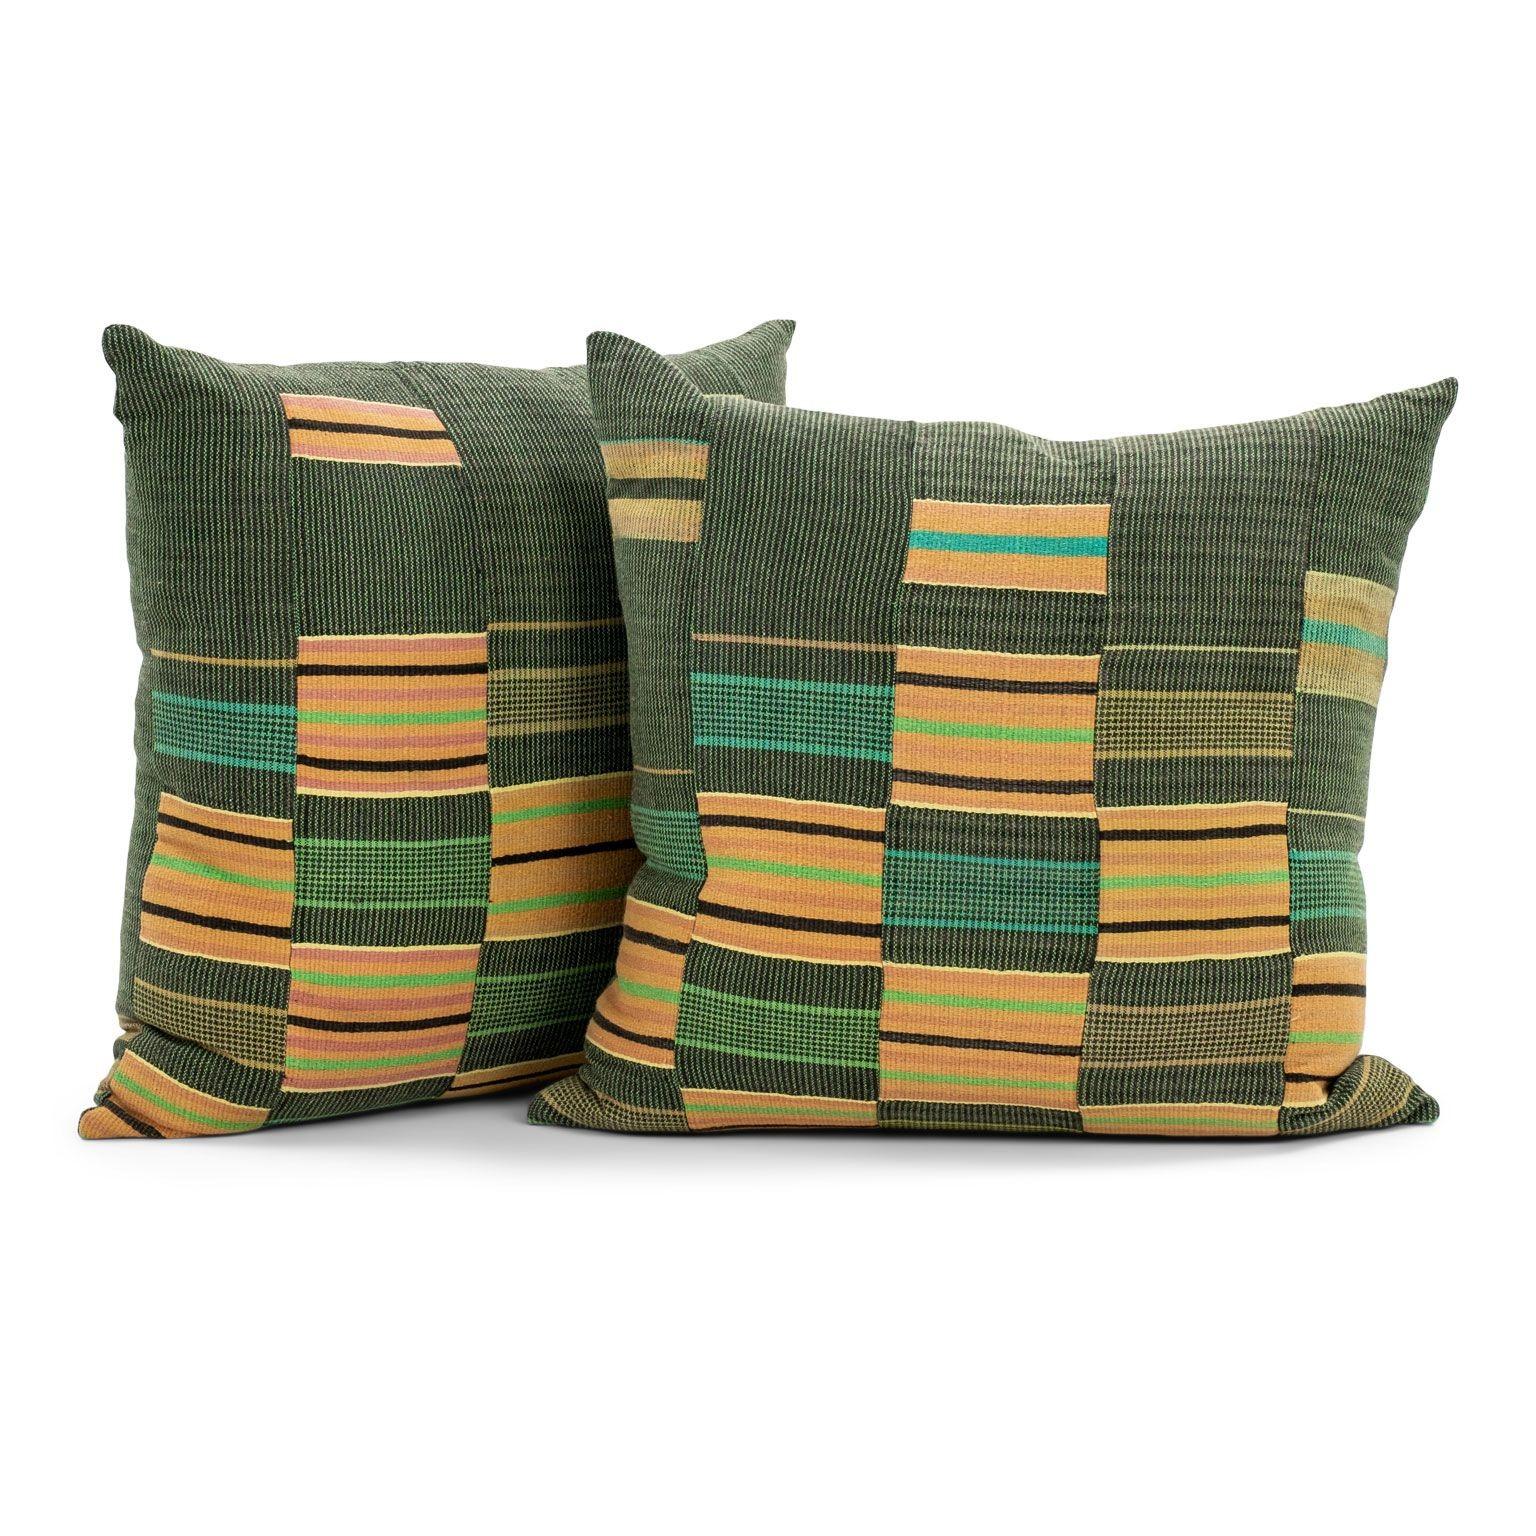 Yellow and Green Nwentoma cloth cushions: thick vintage cotton Kente fabric from Africa in hand-dyed green and yellow colors. Cushions include fasteners and feather inserts. Sold separately and priced $375 each.